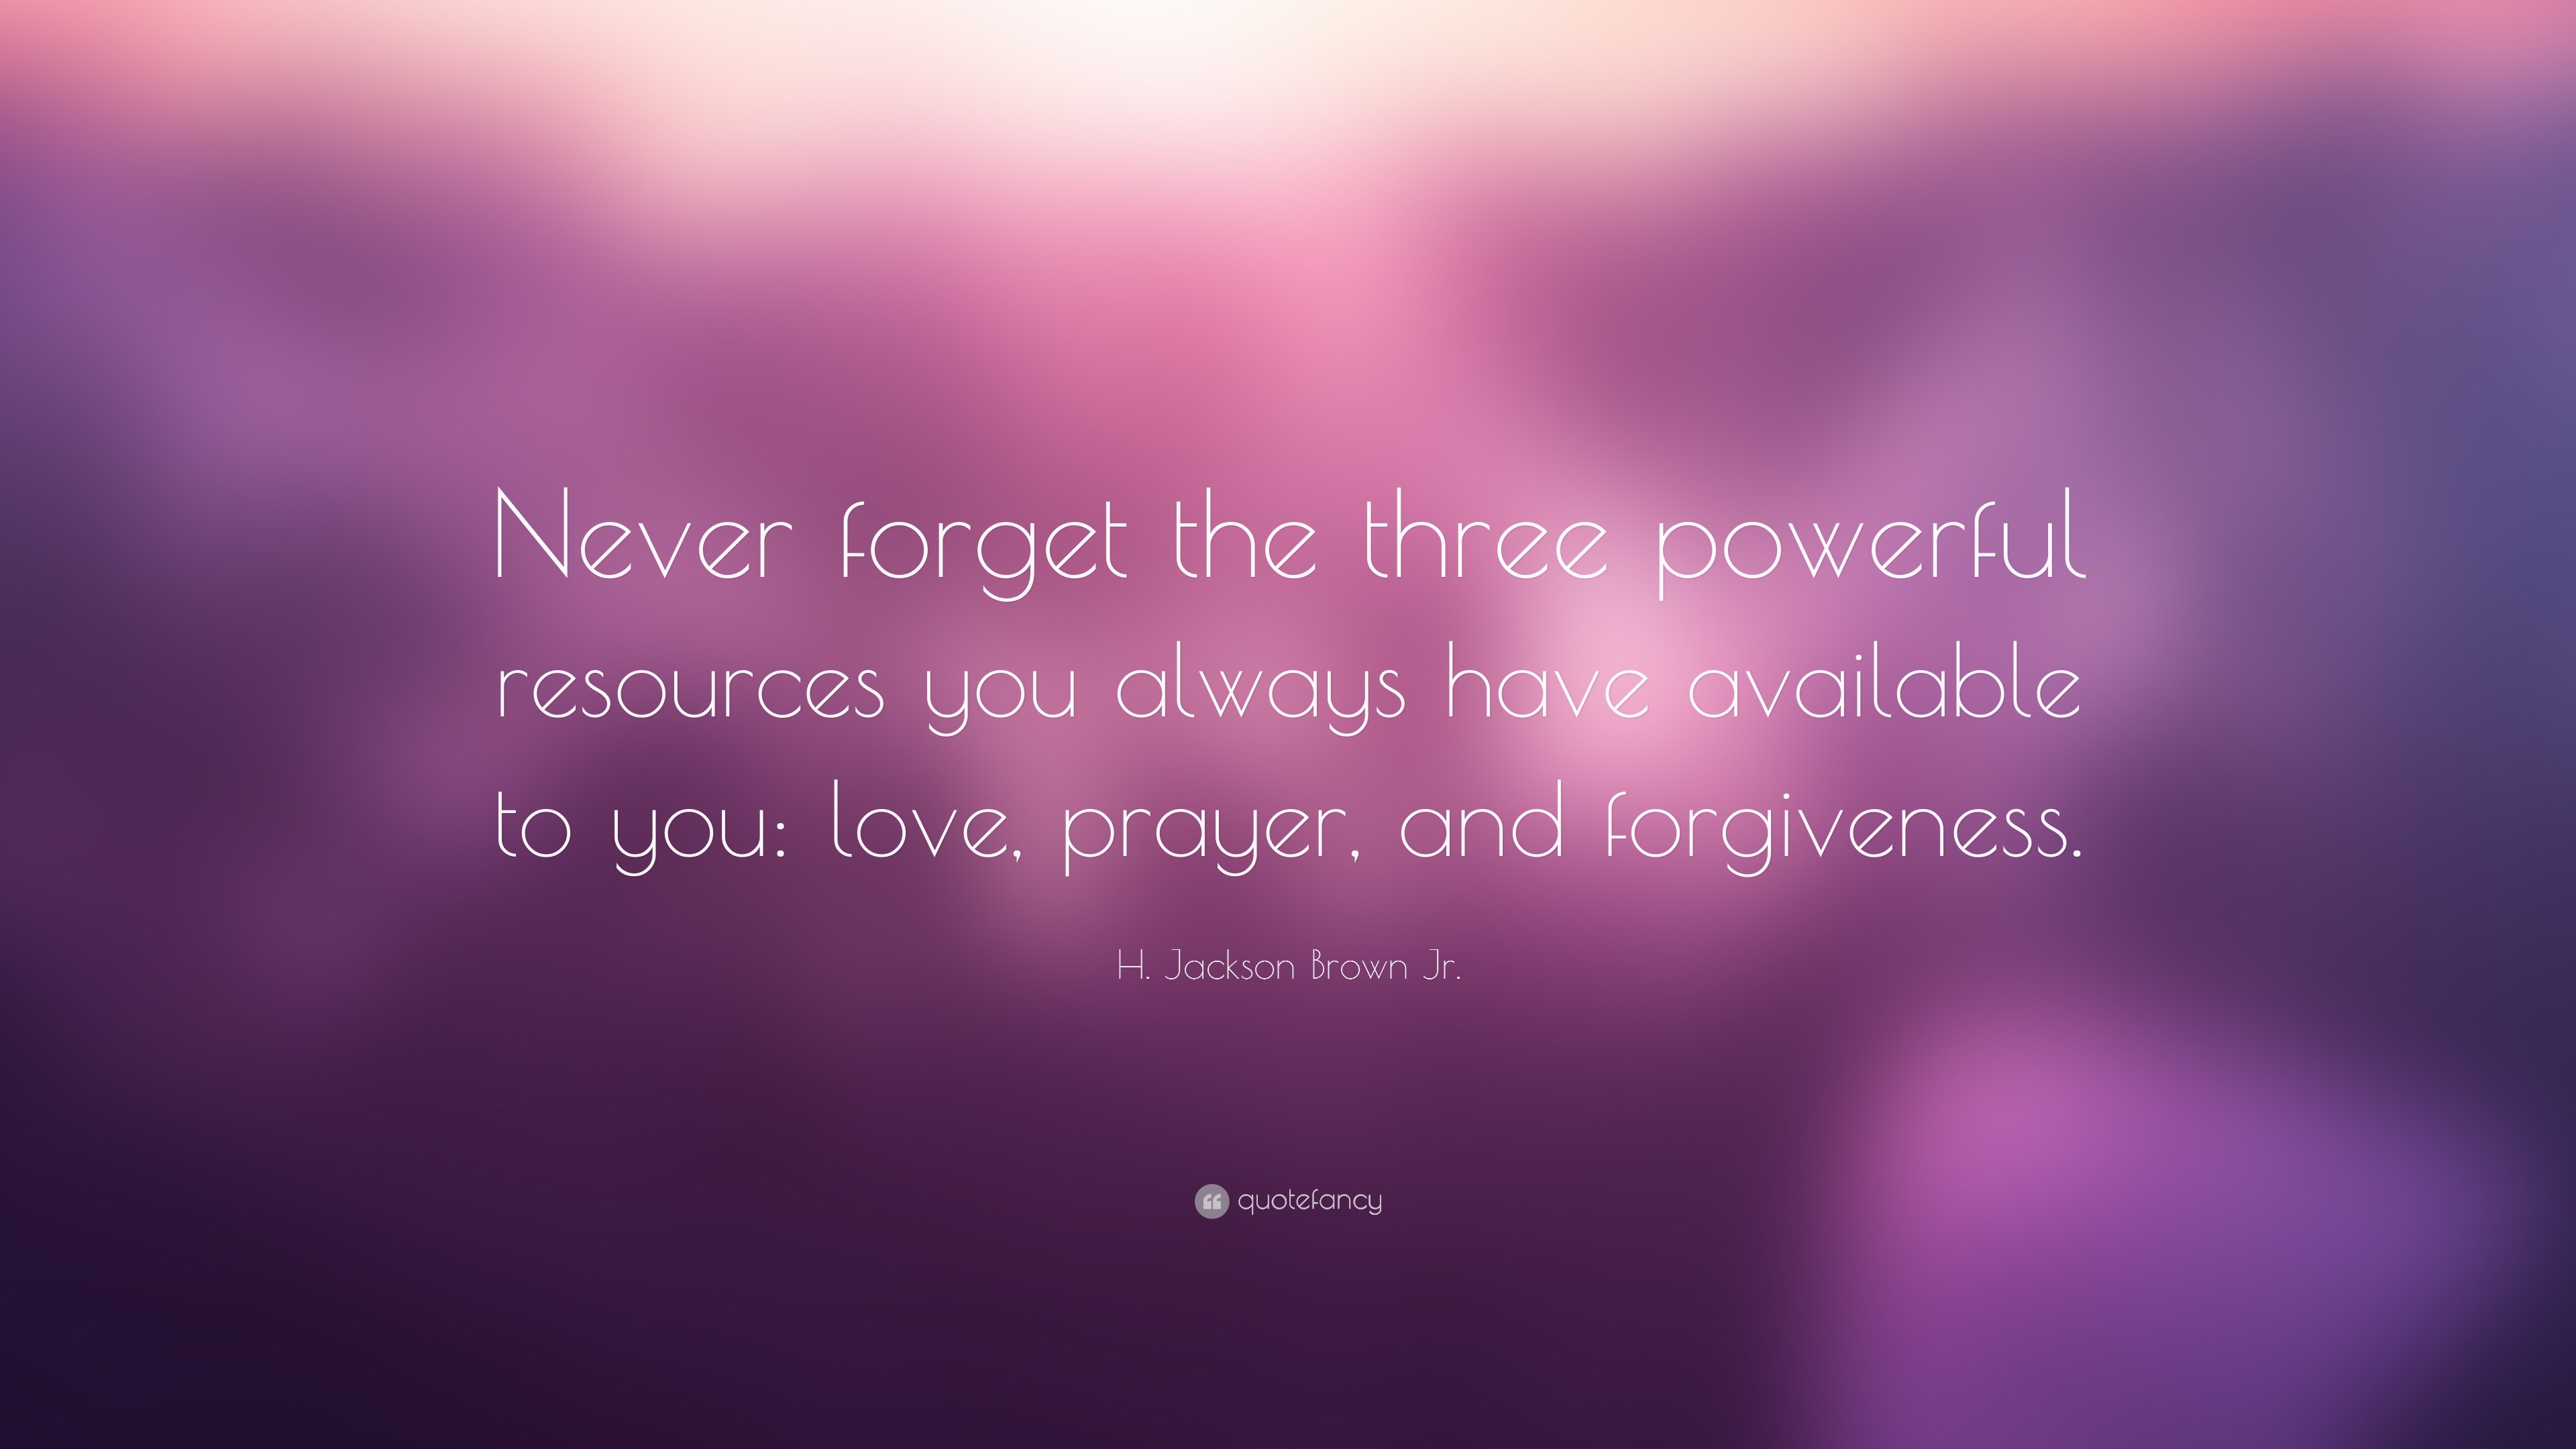 H Jackson Brown Jr Quote “Never for the three powerful resources you